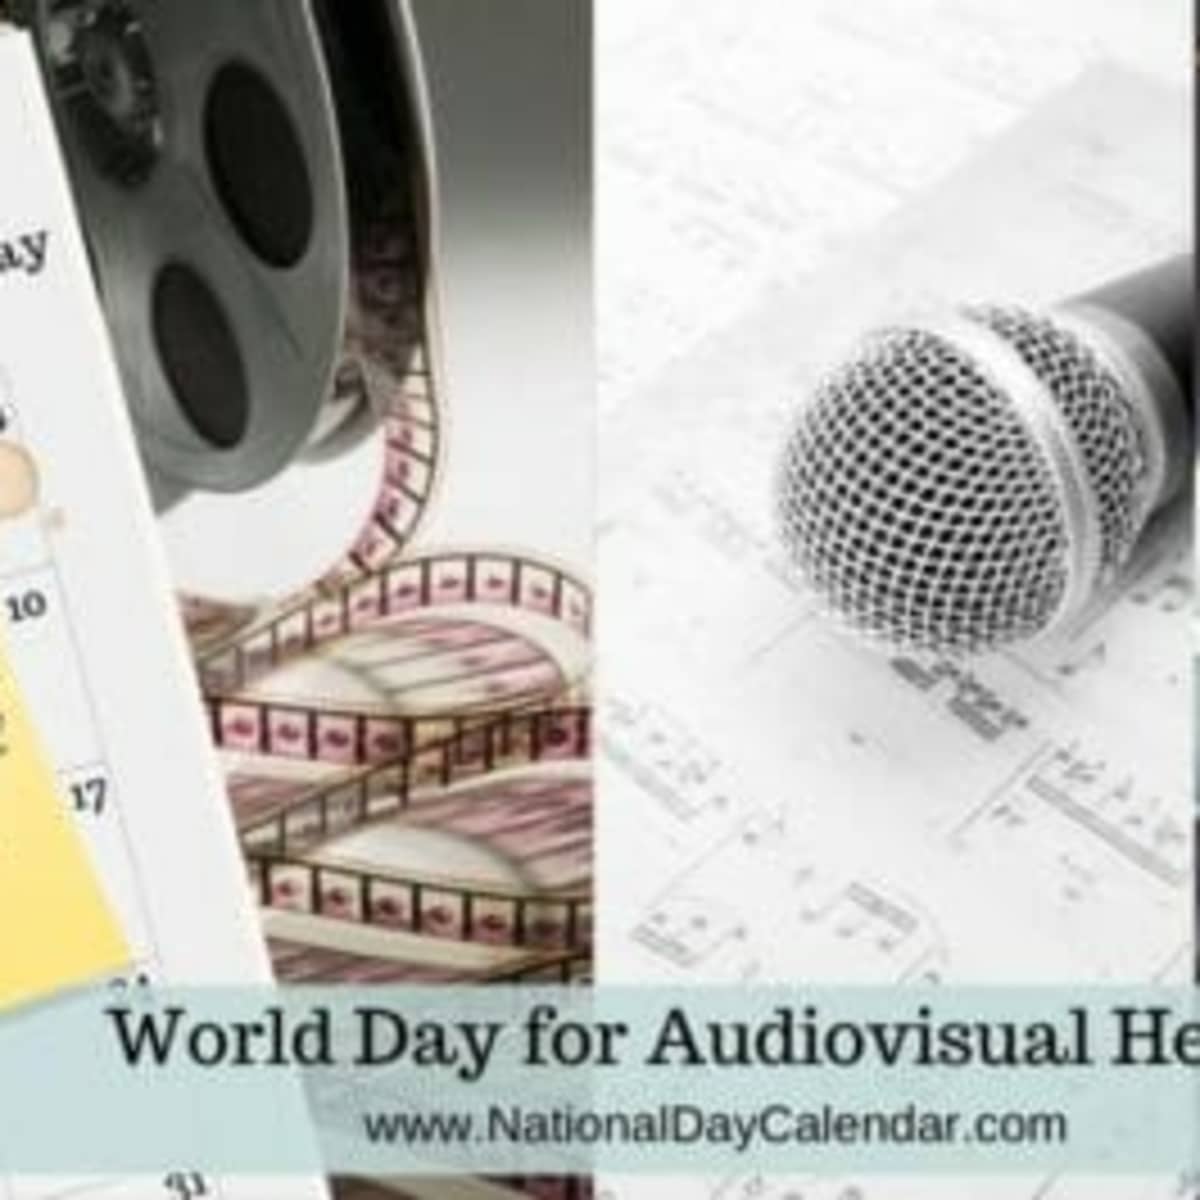 WORLD DAY FOR AUDIOVISUAL HERITAGE - October 27 - National Day Calendar